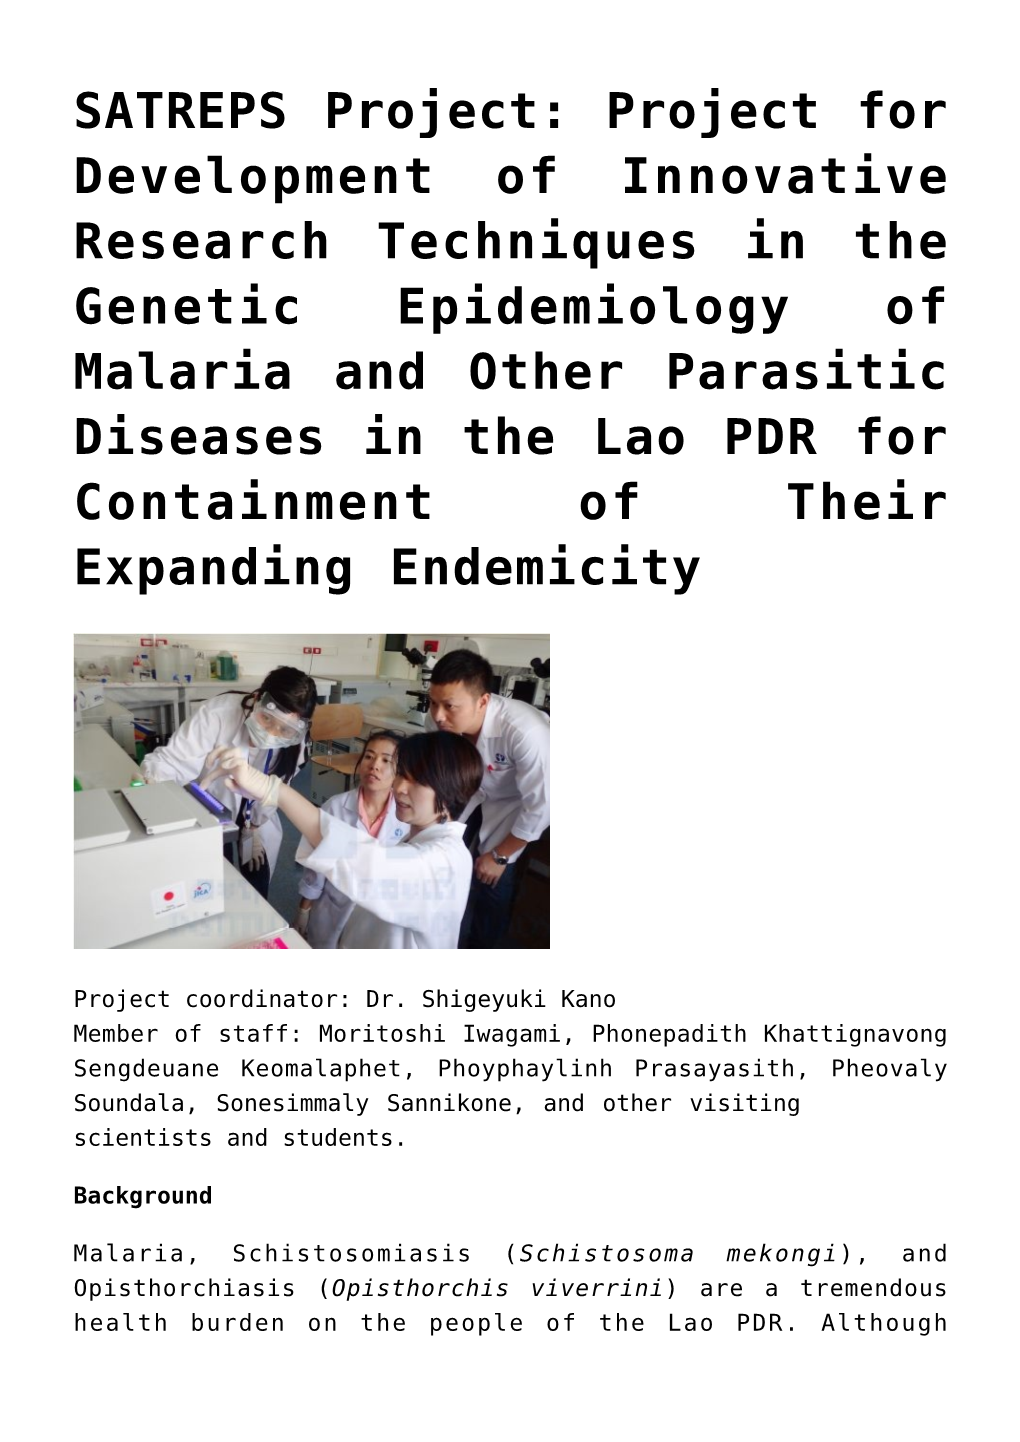 SATREPS Project: Project for Development of Innovative Research Techniques in the Genetic Epidemiology of Malaria and Other Para